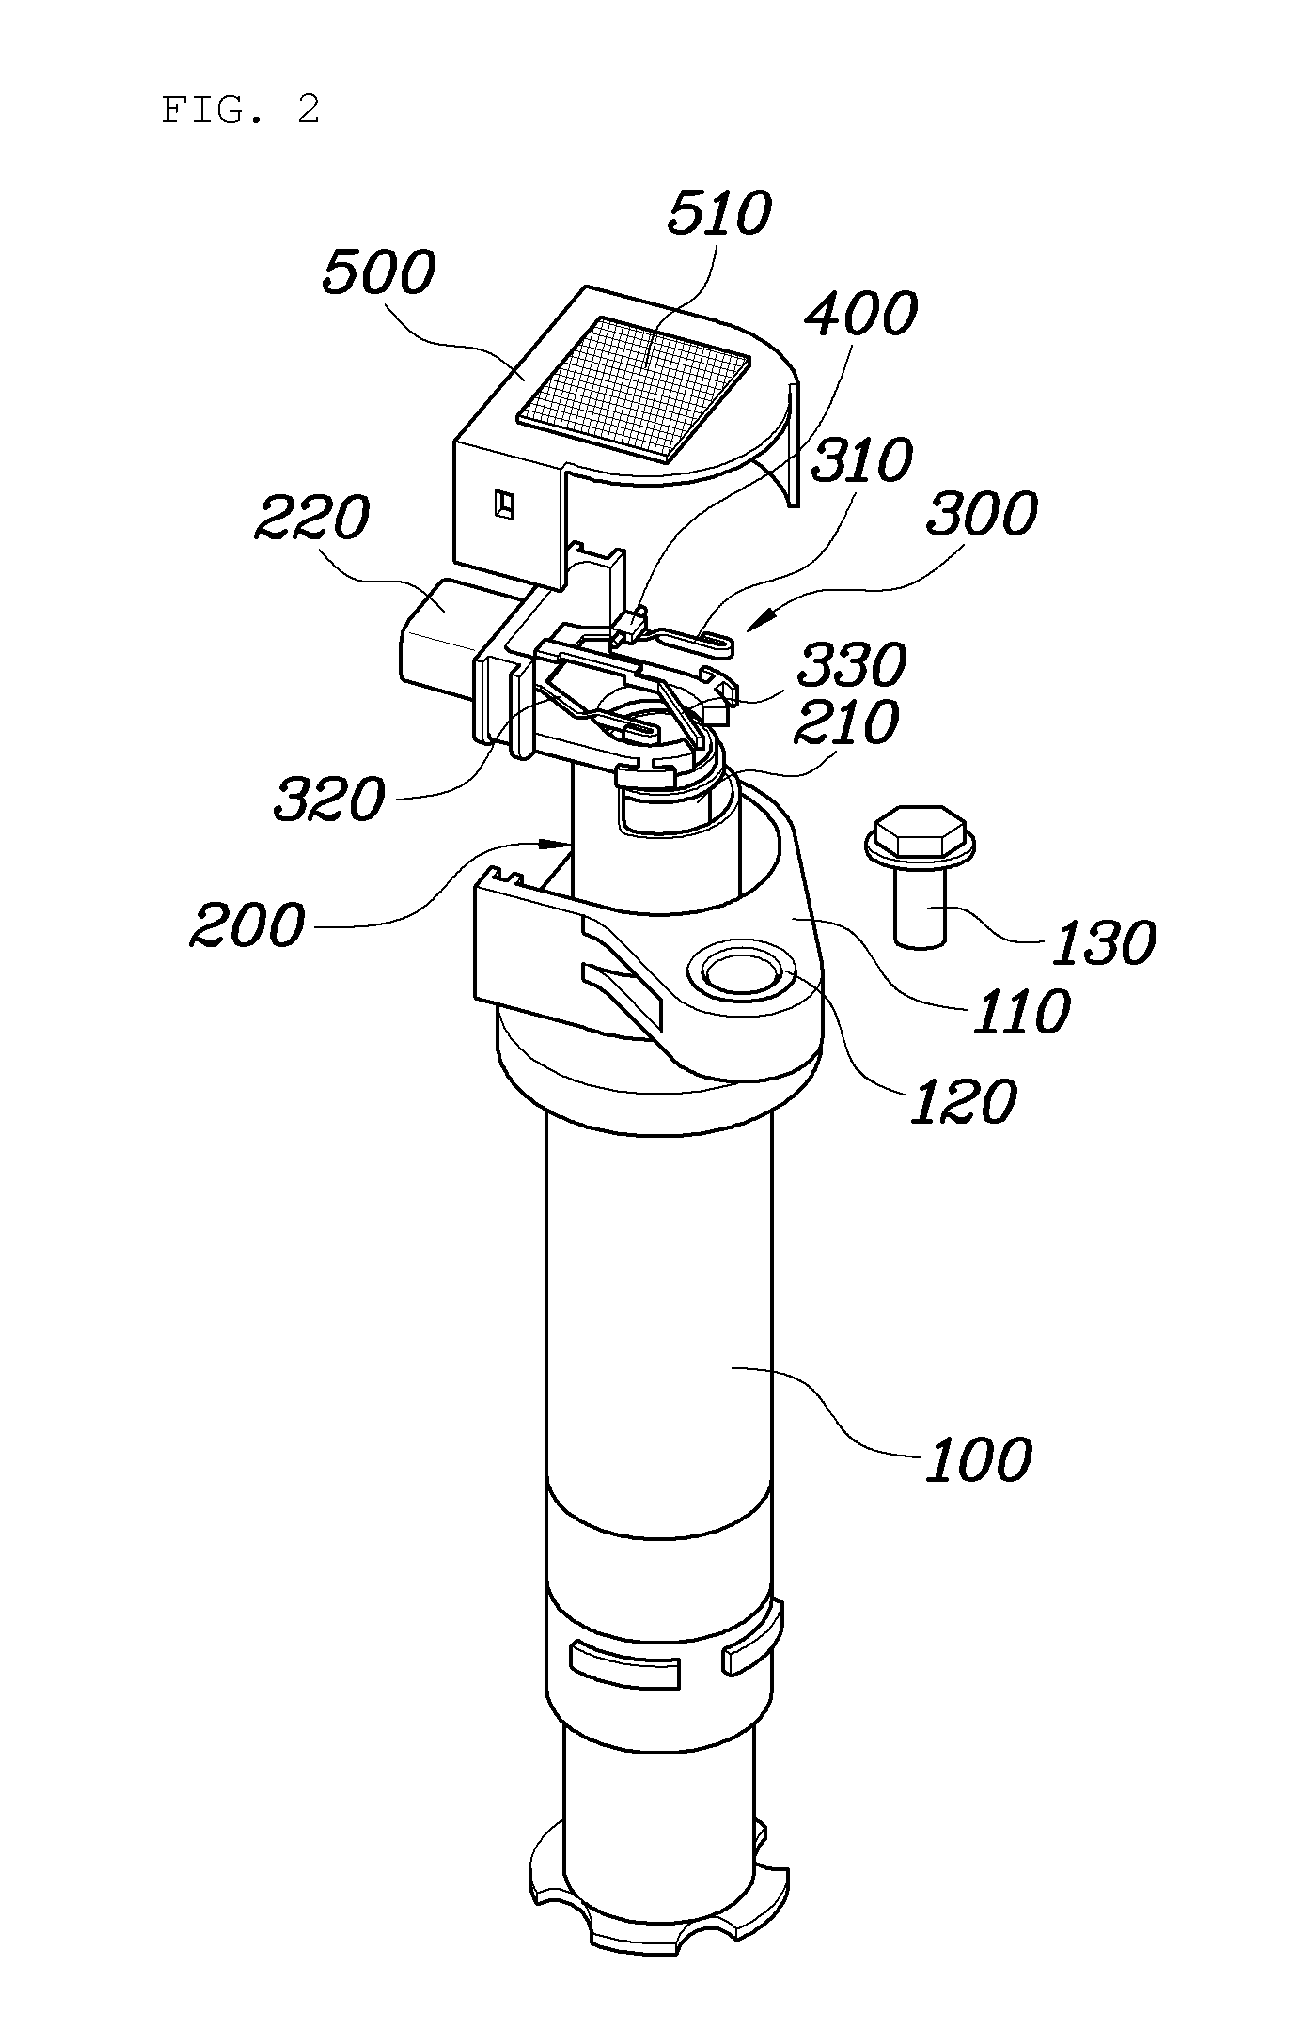 Ignition coil of engine